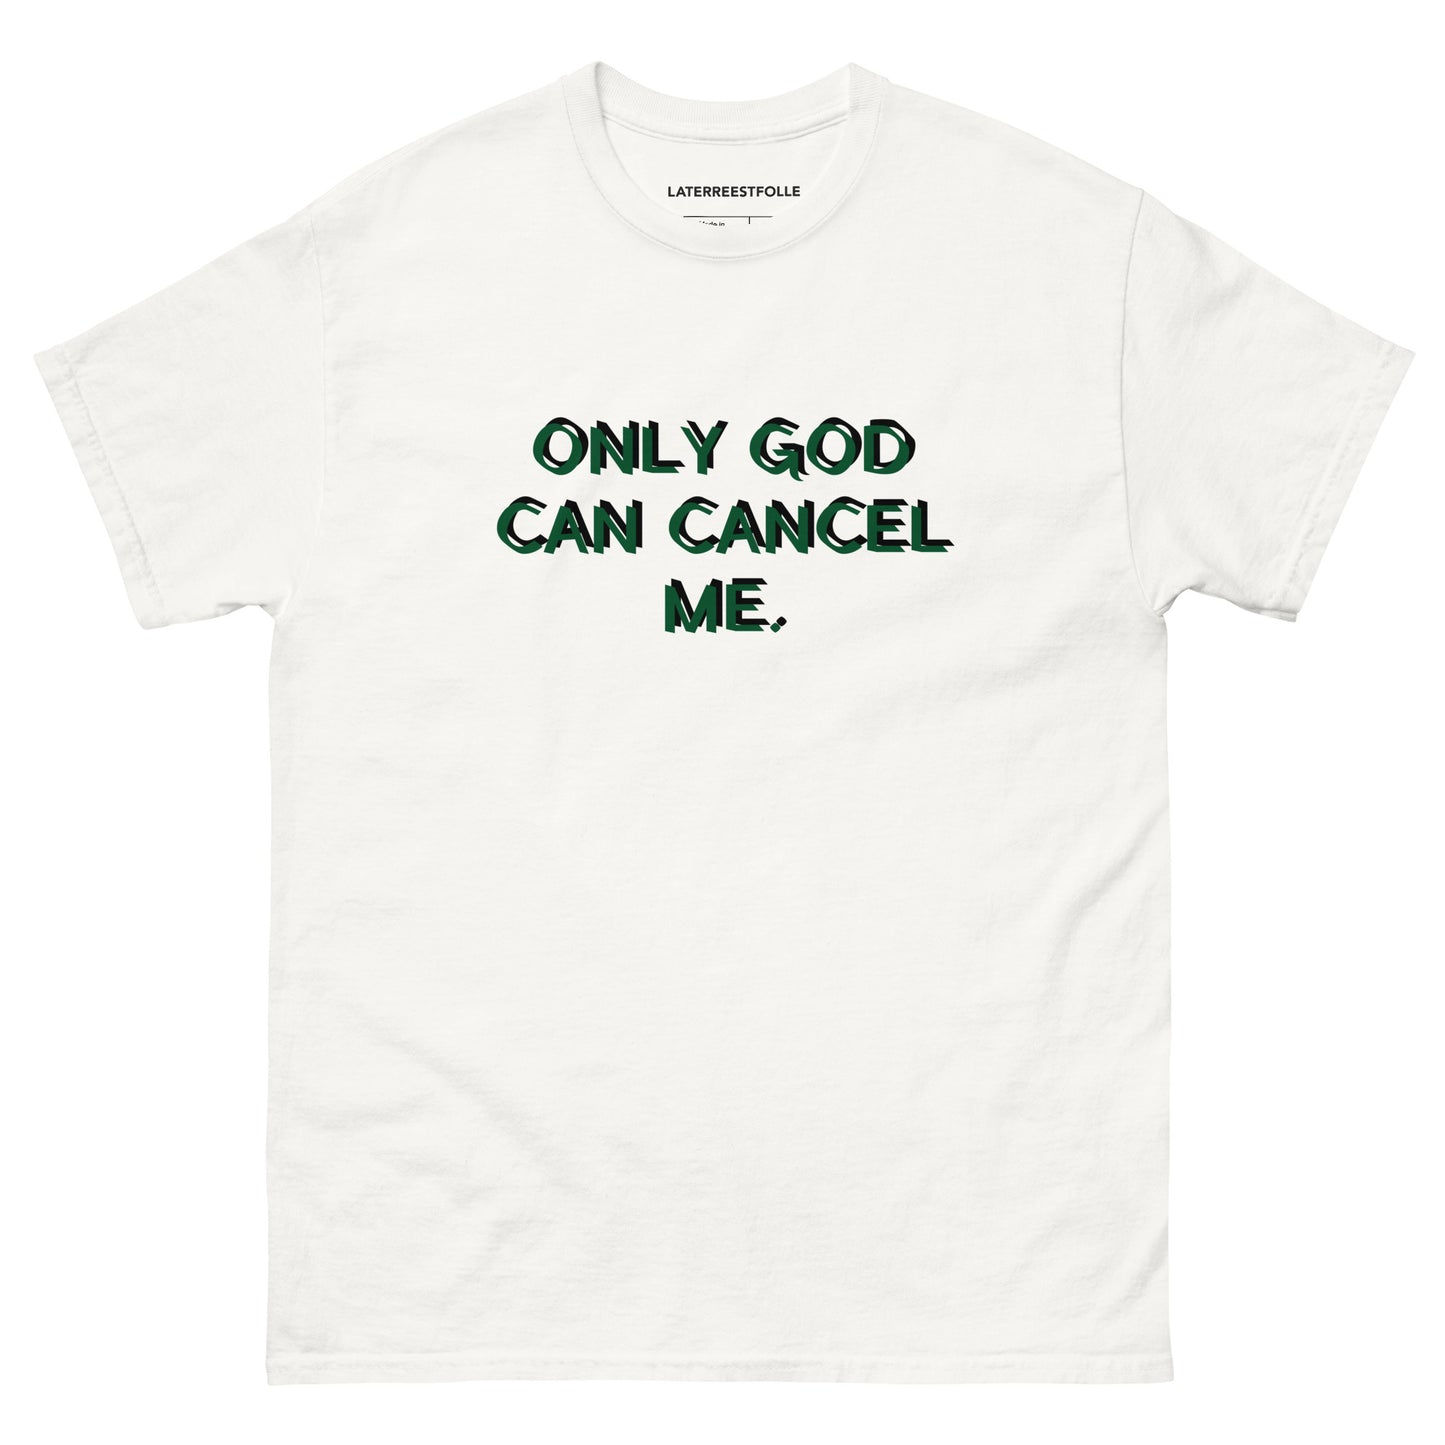 ONLY GOD CAN CANCEL ME T